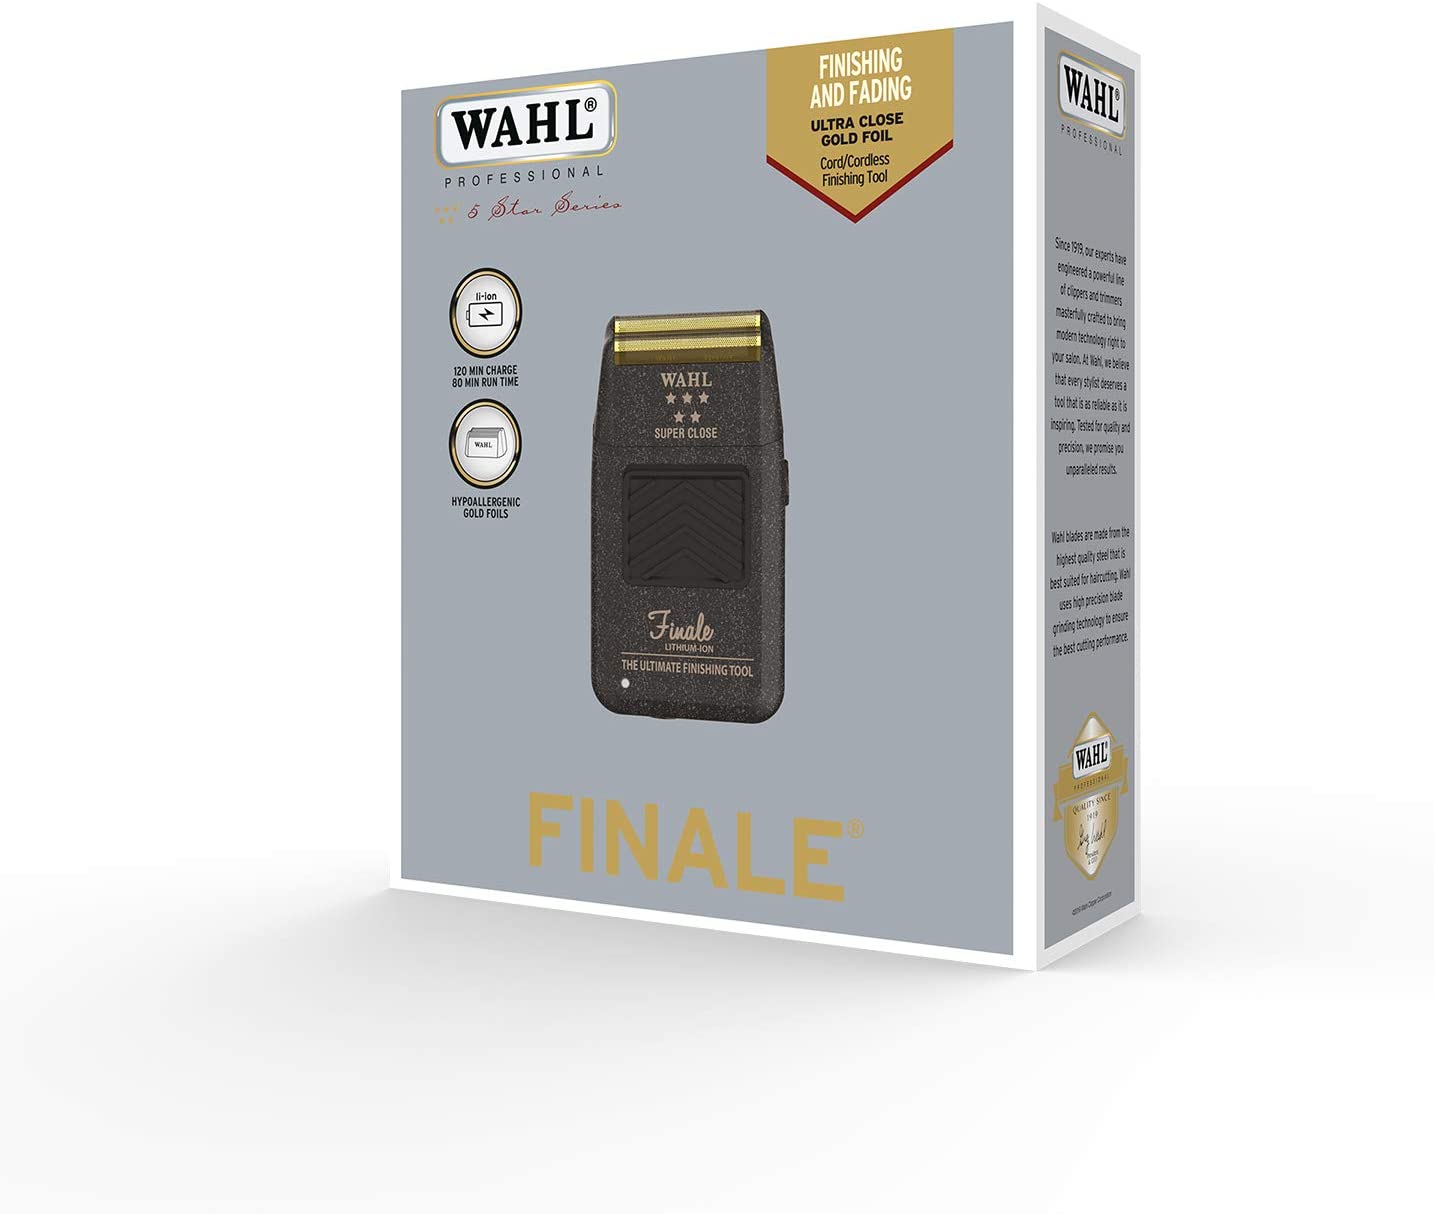 Wahl : 5 Star Finale Lithium Cordless Shaver